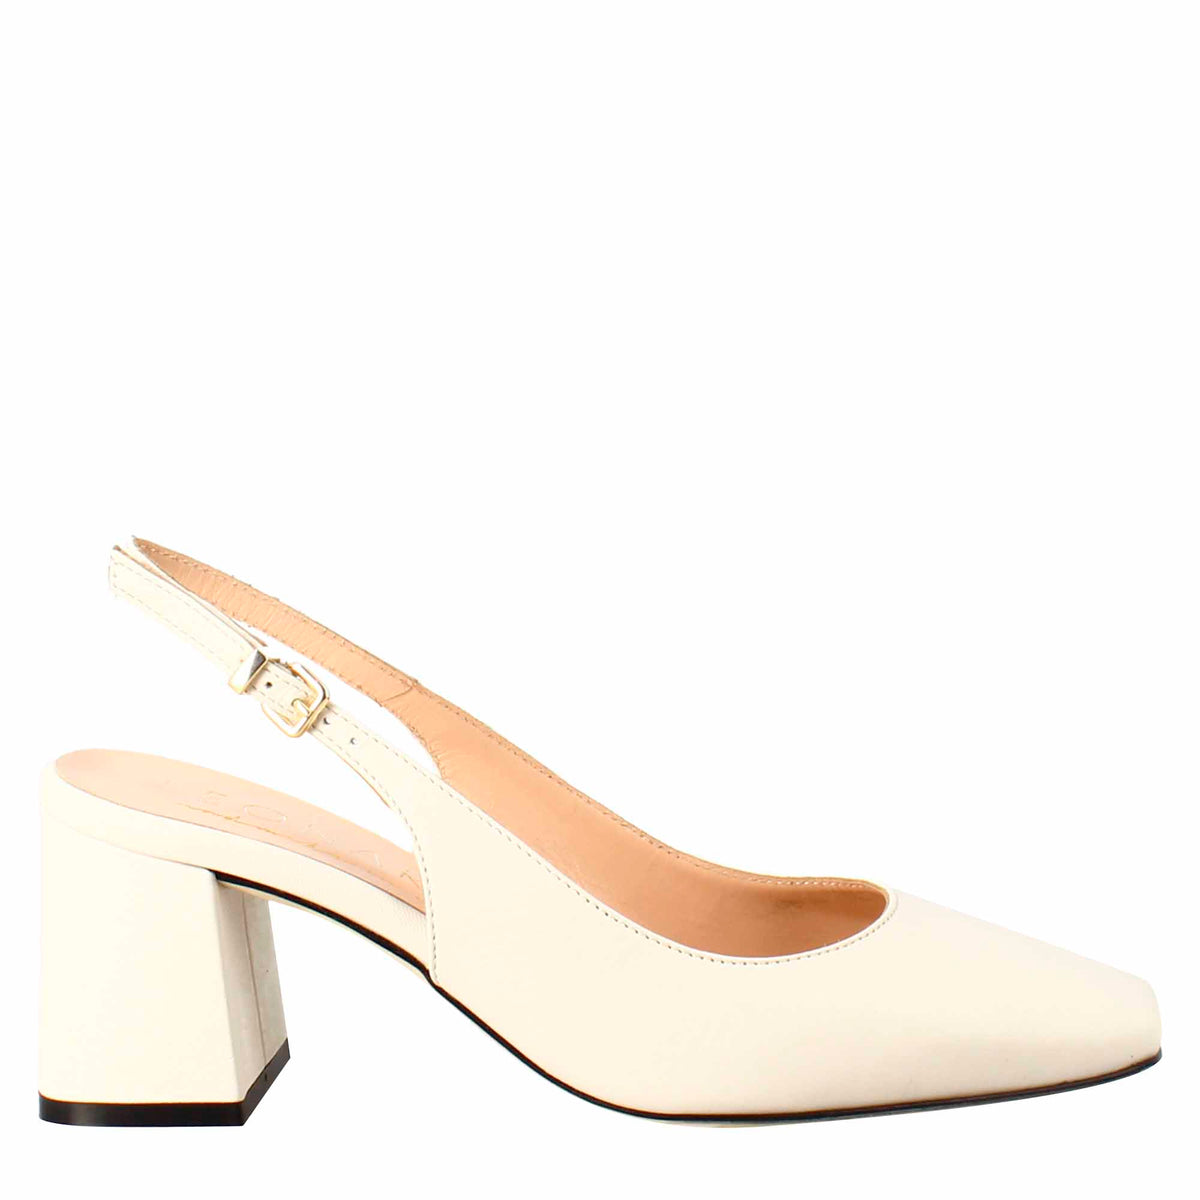 Women's slingback décolleté in pointy cream colored leather 